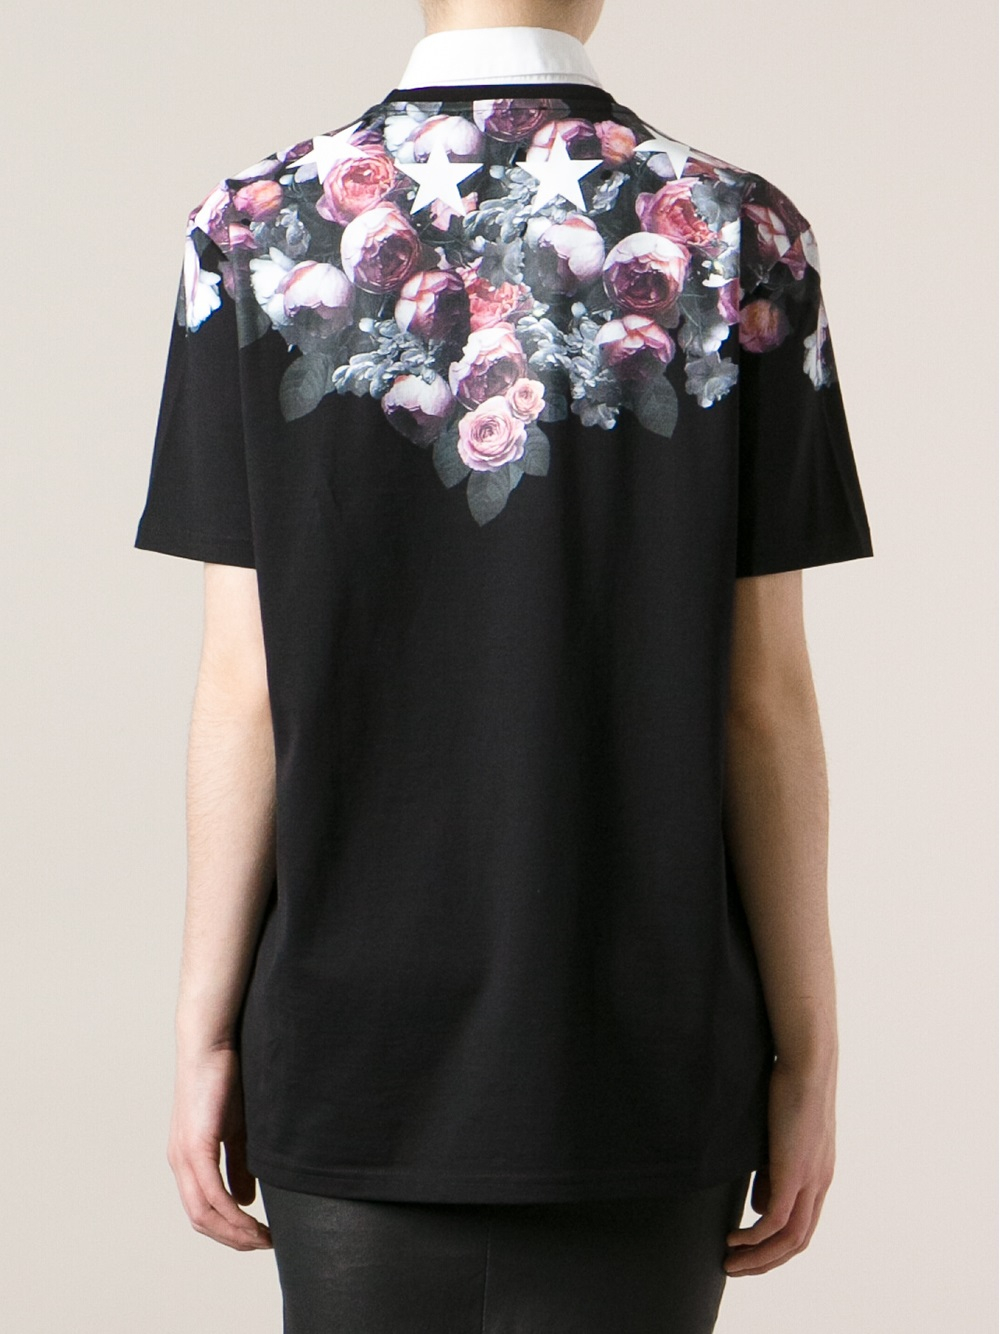 Givenchy Floral Print Tshirt in Black - Lyst